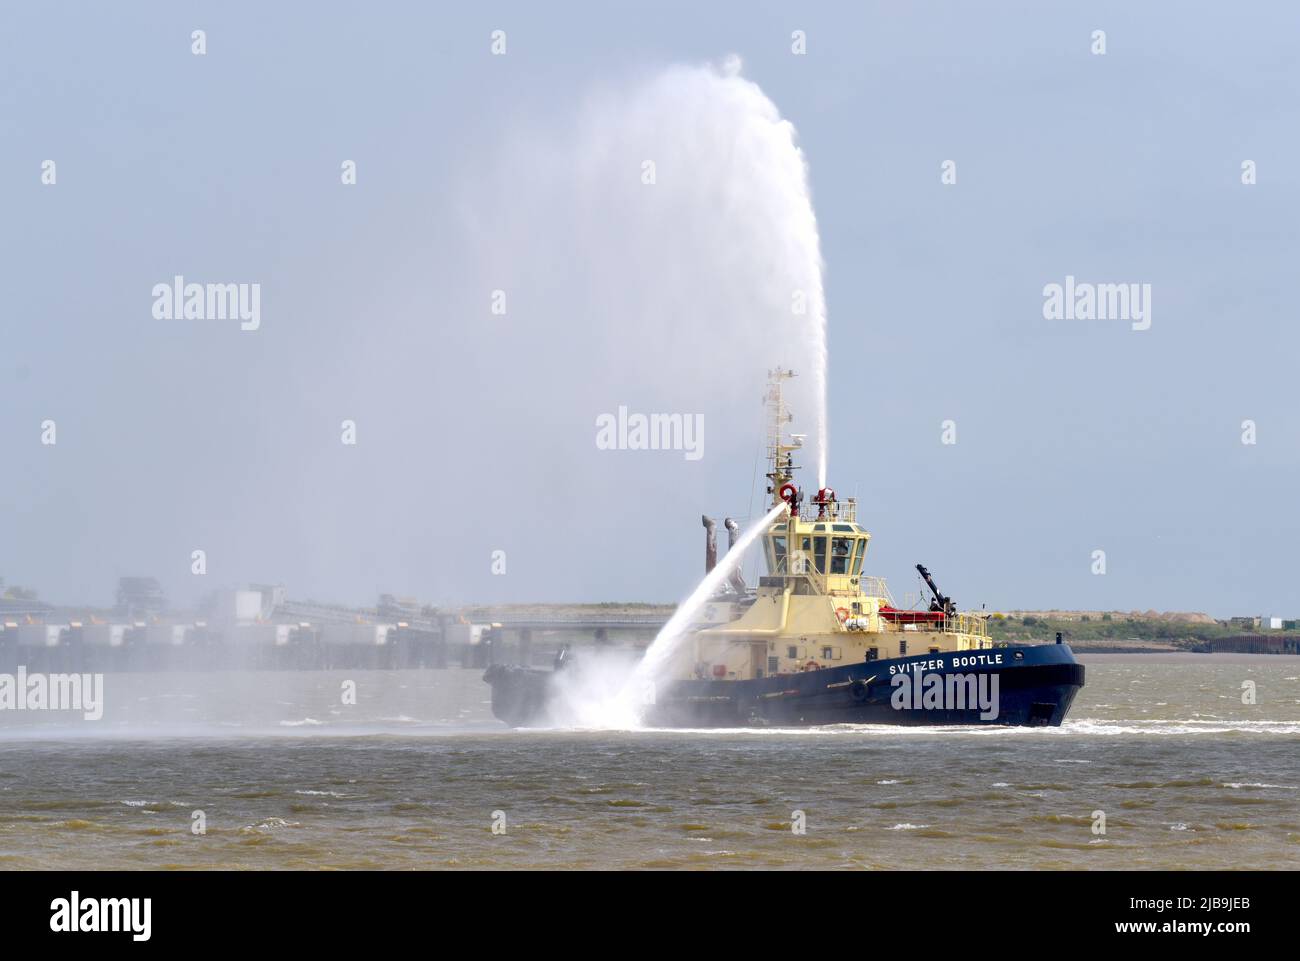 04/06/2020 Gravesend UK River Thames. At 12 noon mid-day the Thames river community sounded their boat and ship’s horns in celebration of HM Queen’s 7 Stock Photo